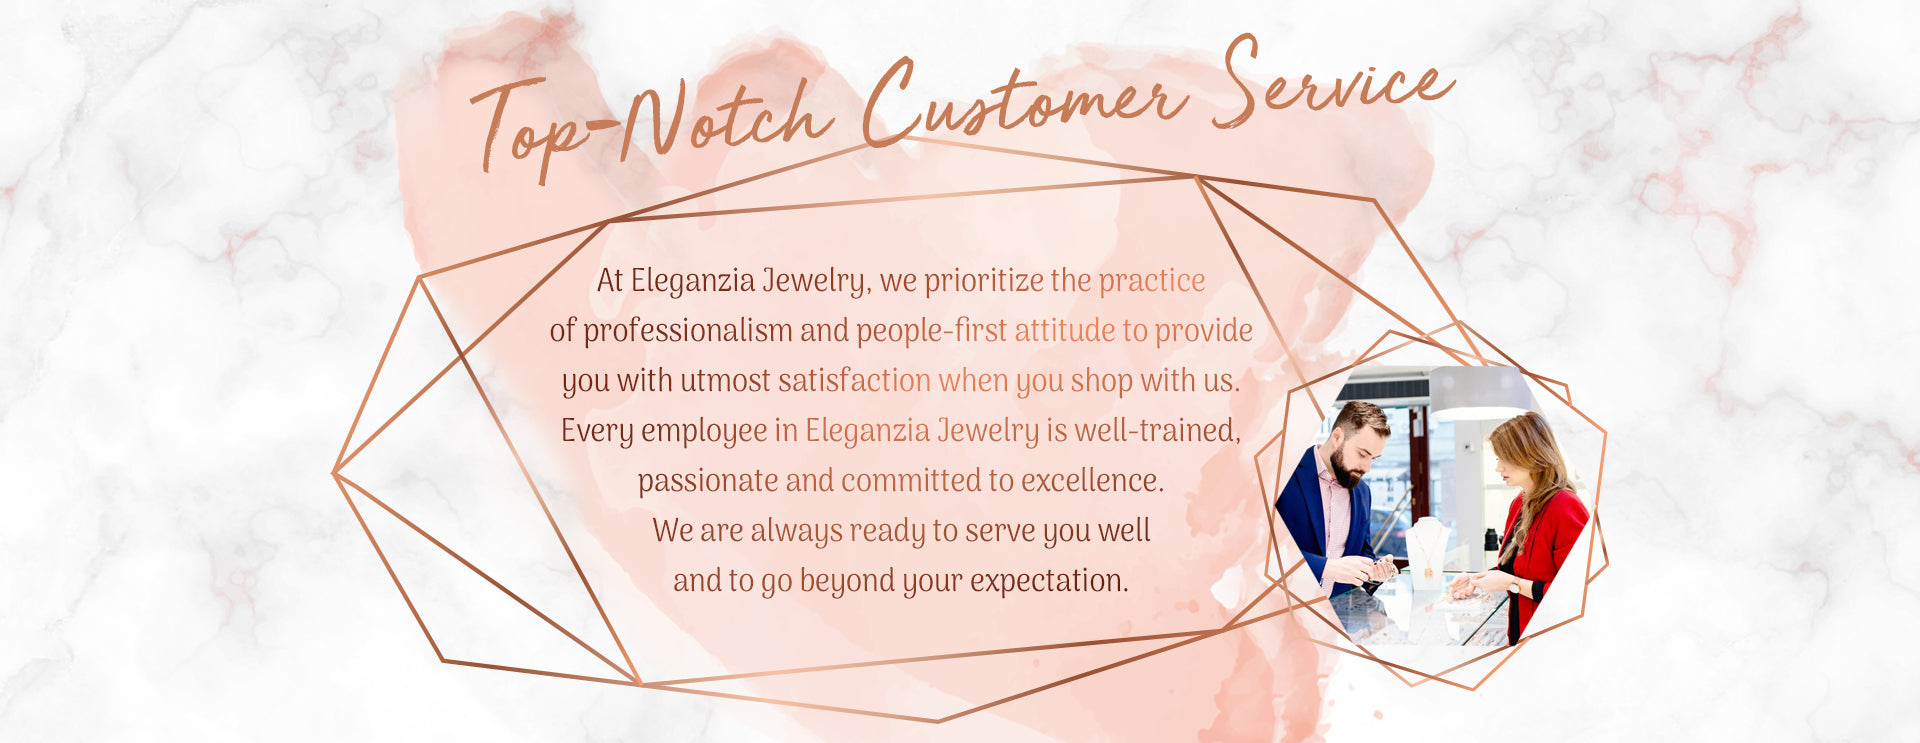 Eleganzia Jewelry Customer Service team support through email contact form